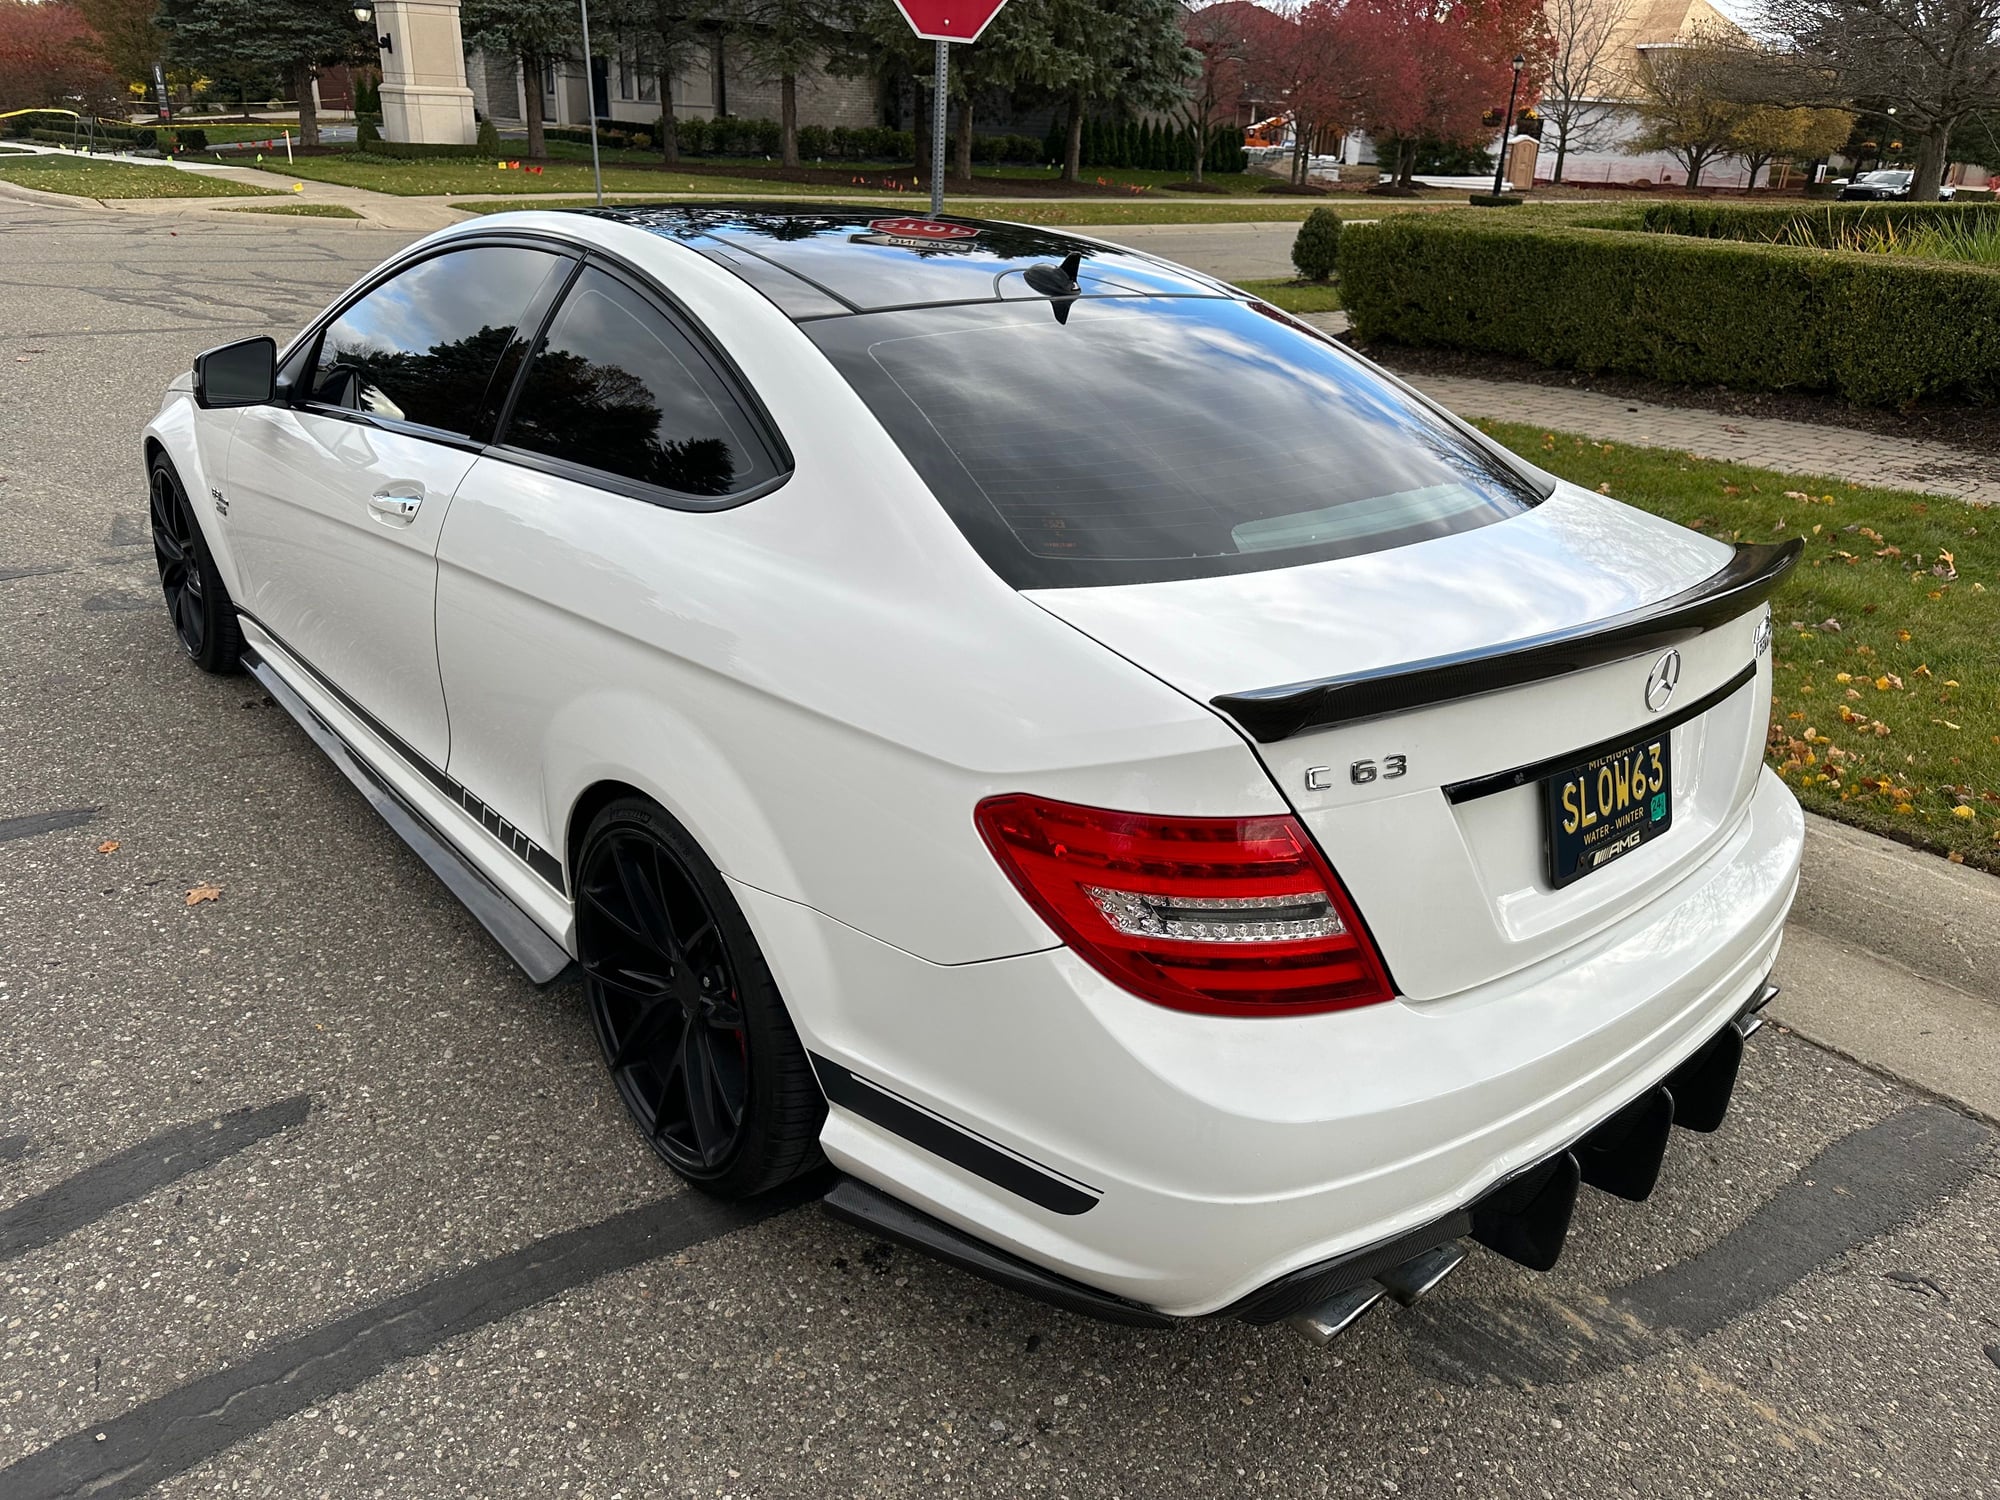 2015 Mercedes-Benz C63 AMG - 2015 Mercedes Benz c63 AMG 507 edition coupe headers &renntech tuned - Used - VIN WDDGJ7HB6FG375021 - 105,000 Miles - 8 cyl - Coupe - White - Rochester Hills, MI 48307, United States